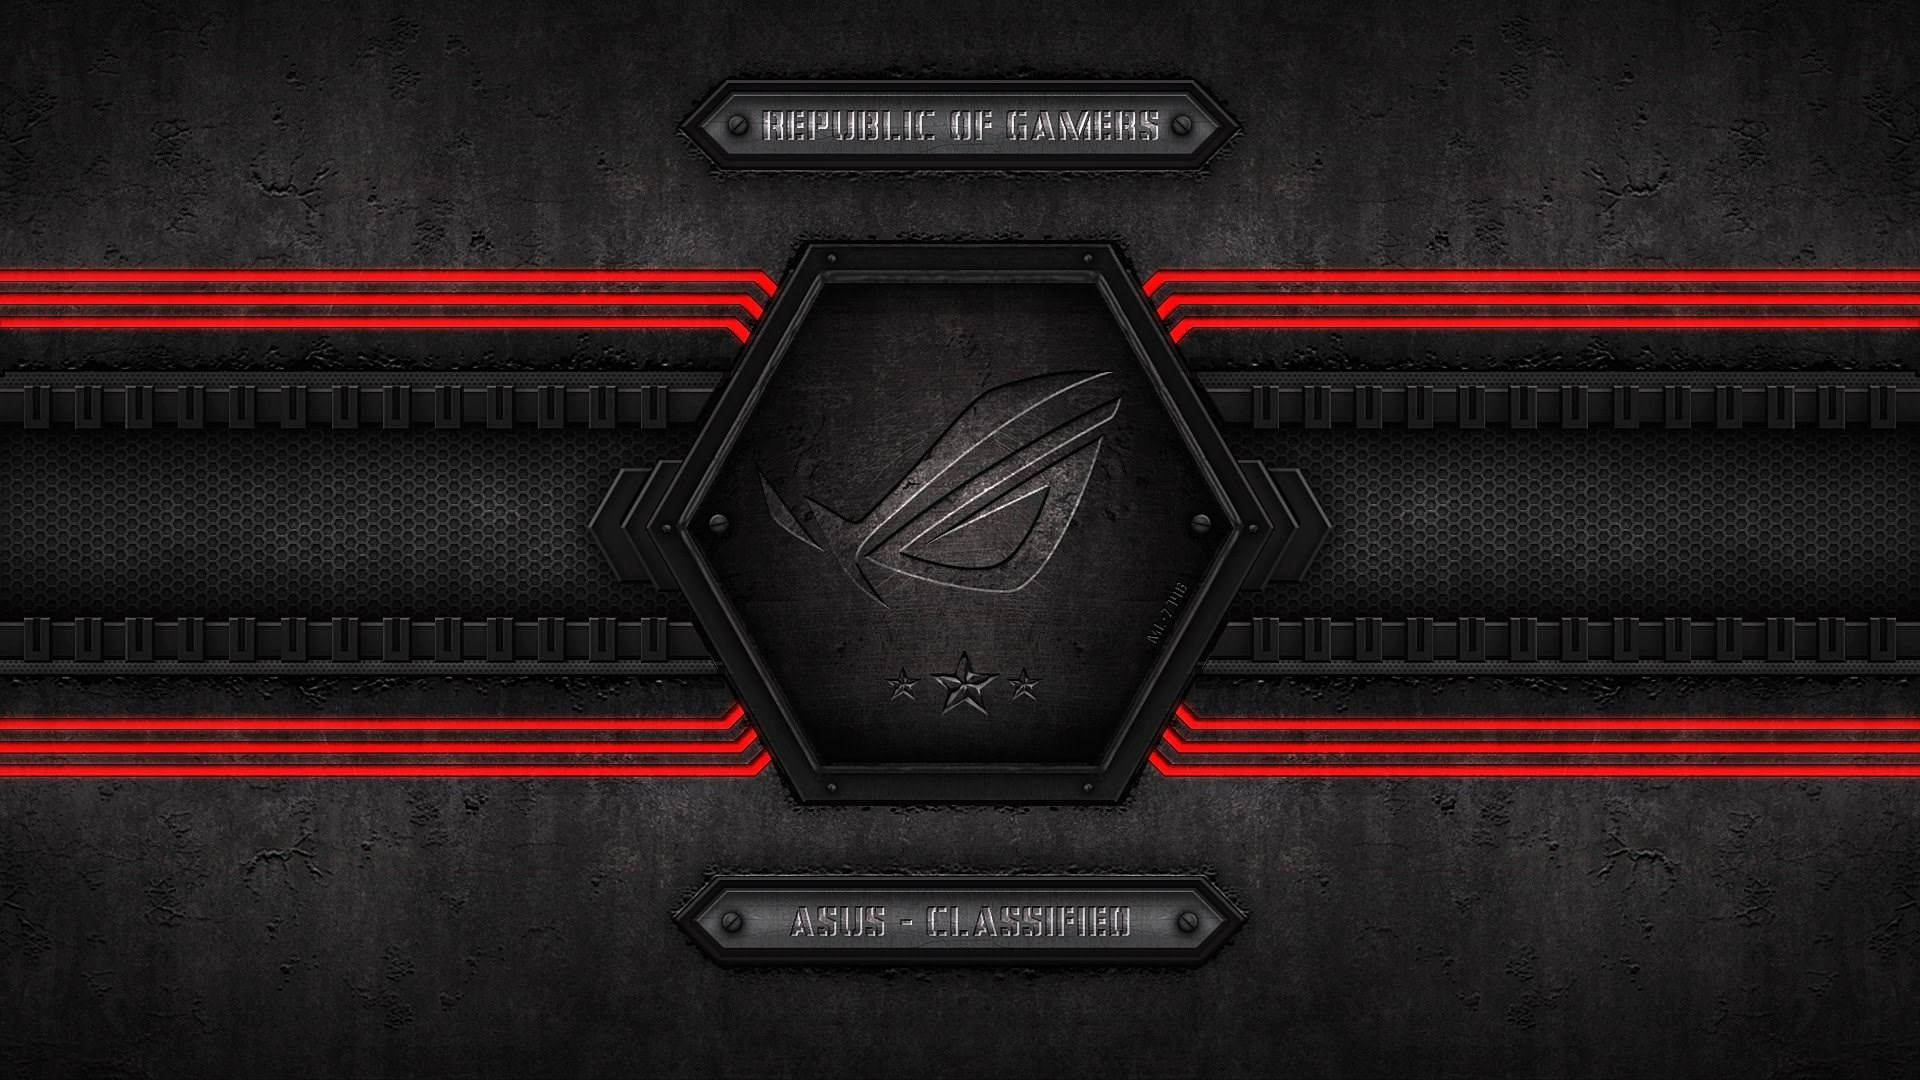 Asus Rog Classified Poster Background